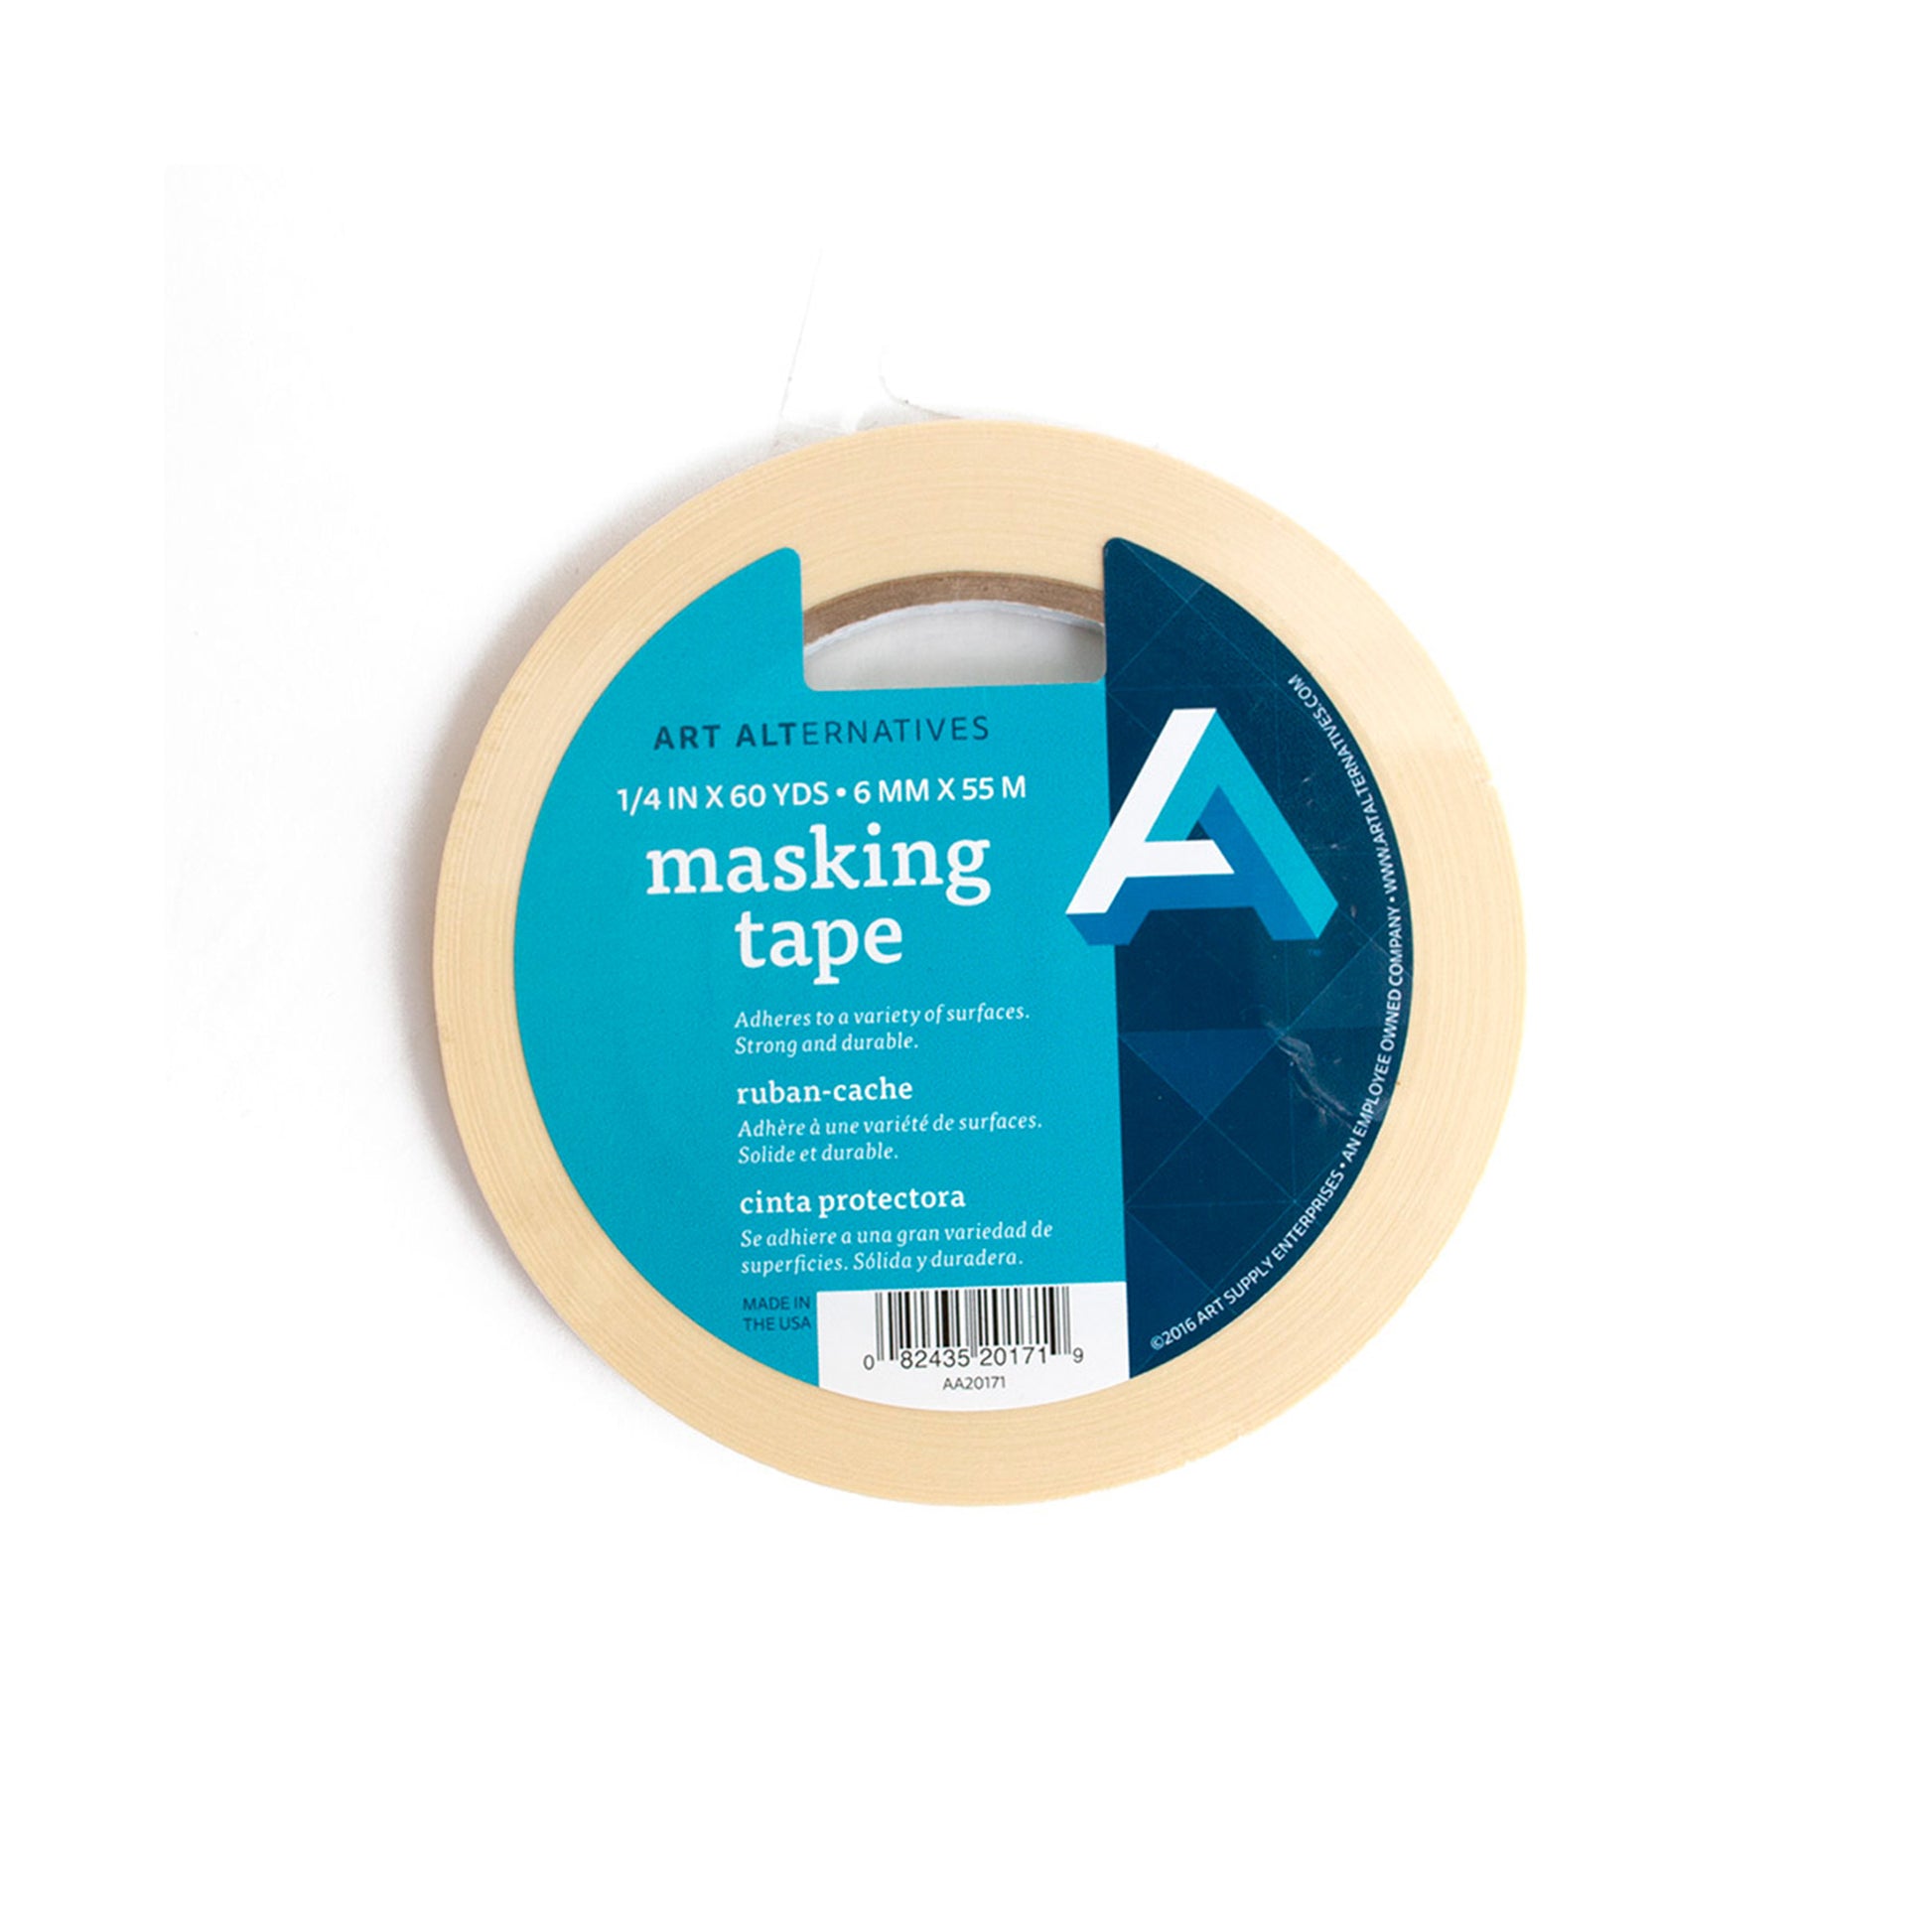 art alternative masking tape packaged with a blue label with a white background